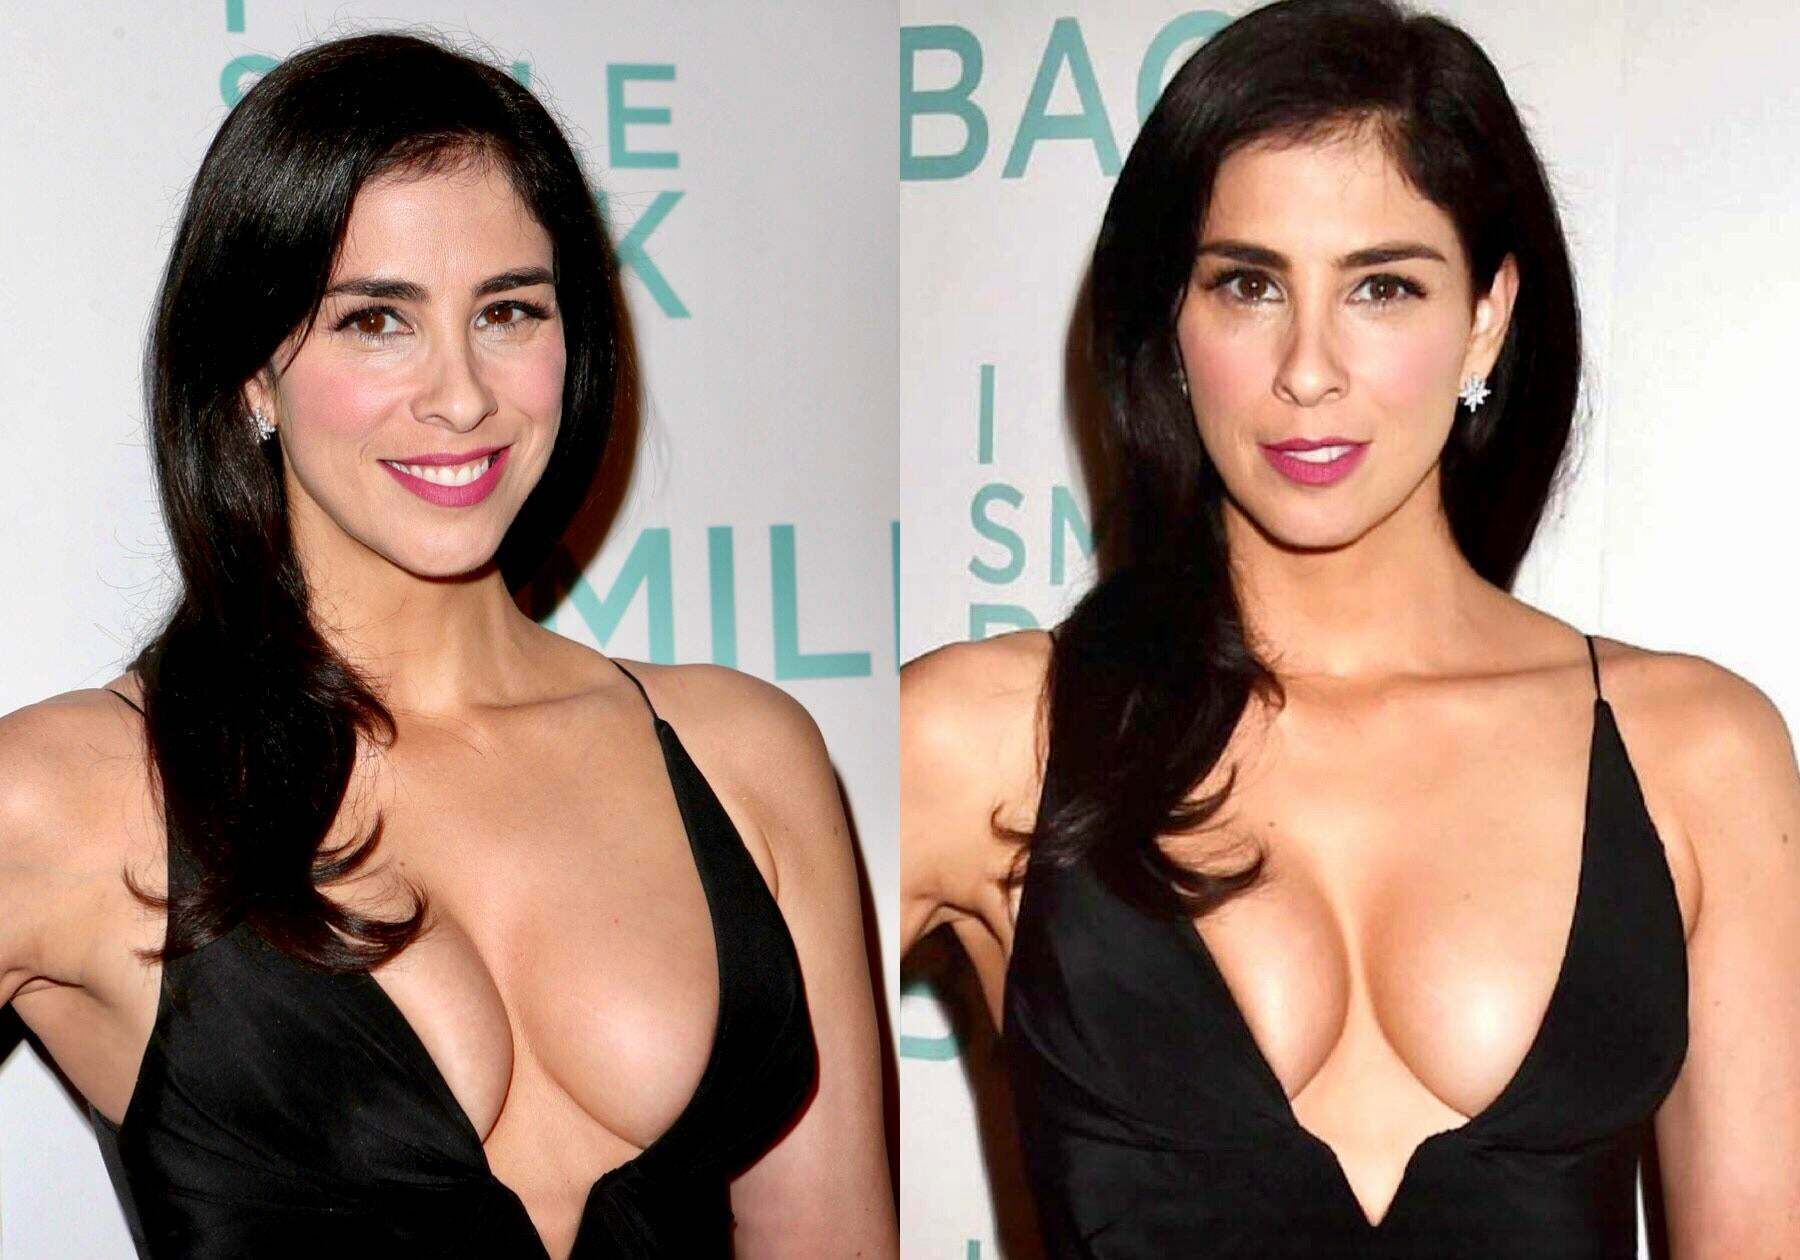 Sarah Silverman’s tits looks so great in this dress.